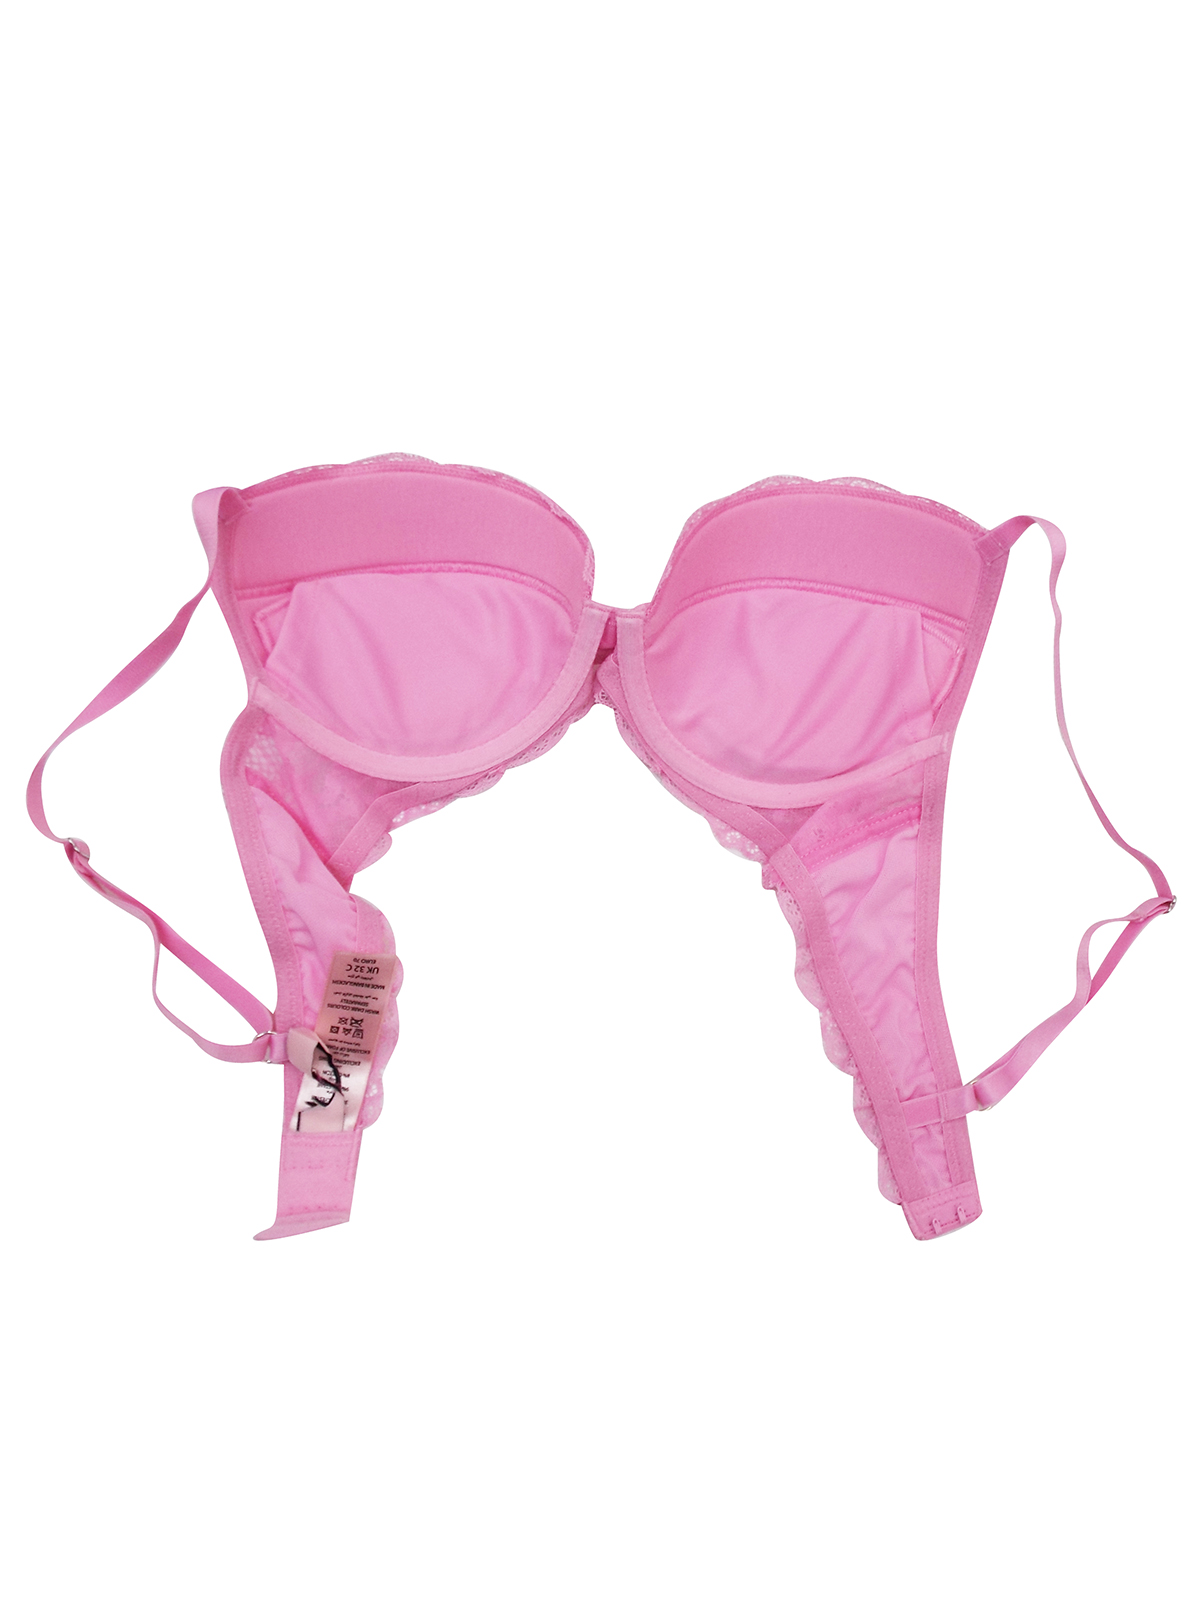 Buy New Boux Avenue Bras 30B Pink and Coral at Ubuy Uganda